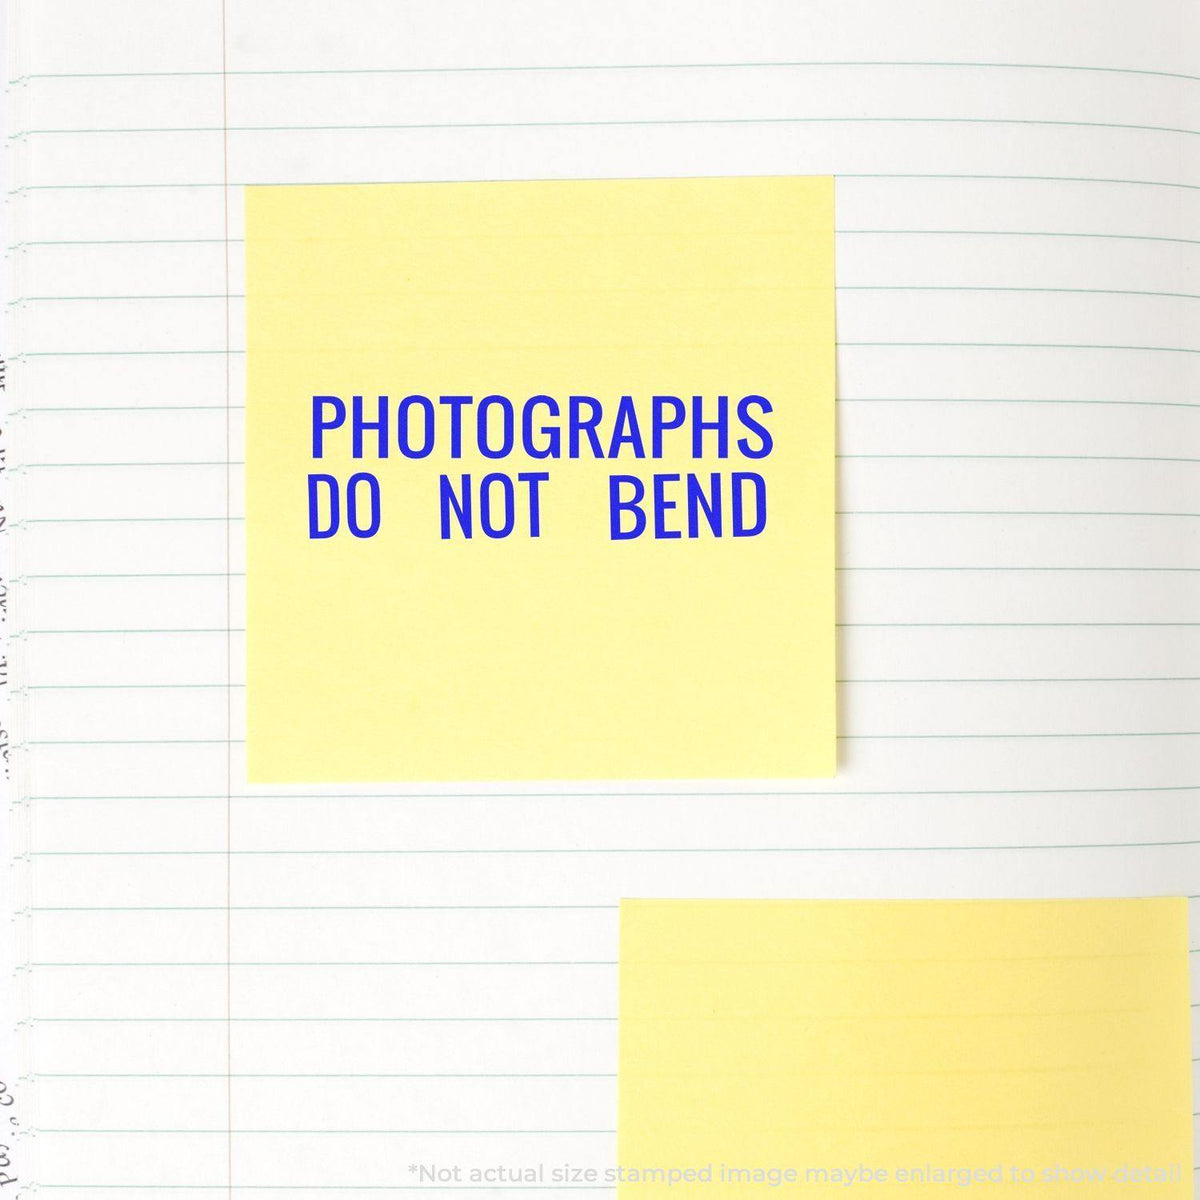 Large Photographs Do Not Bend Rubber Stamp In Use Photo